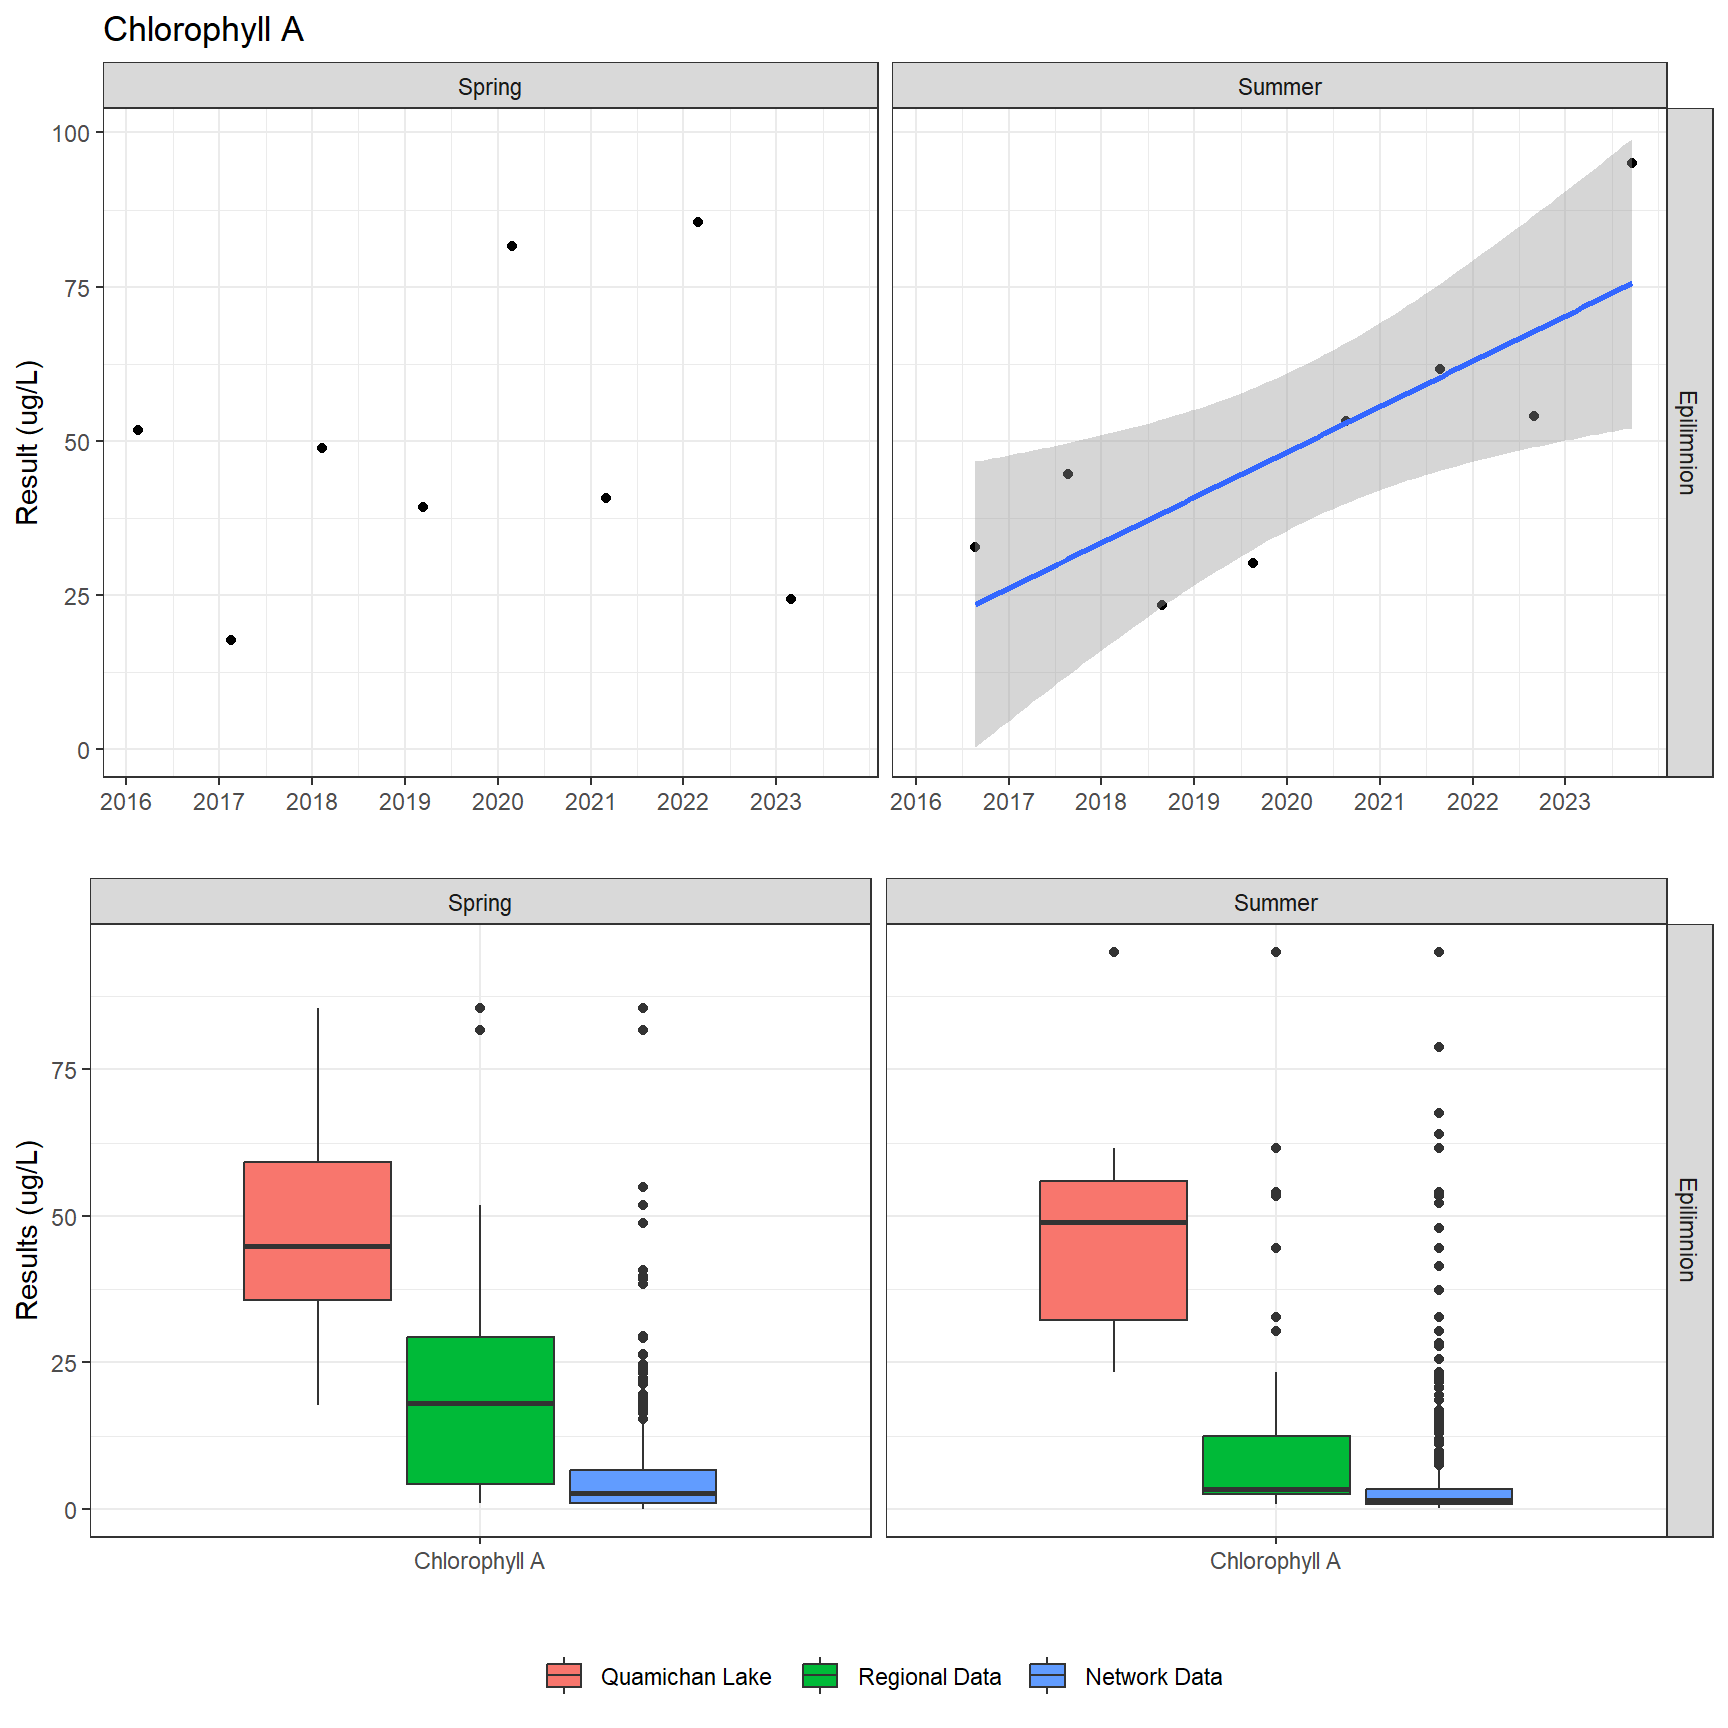 A plot showing results for Chlorophyll A